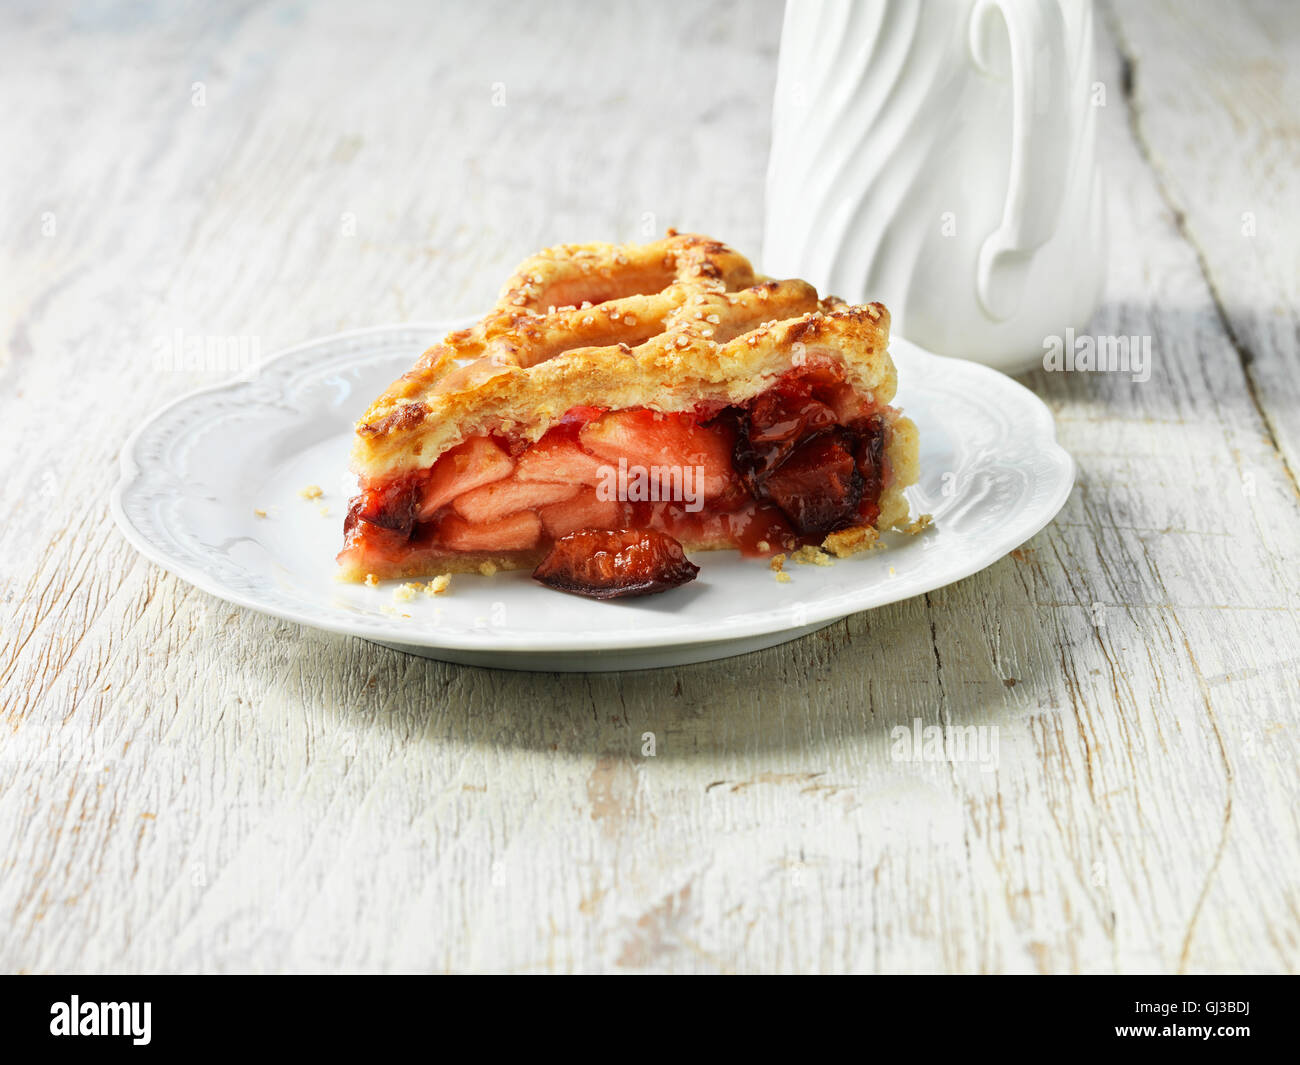 Apple, plum and raspberry pie on white plate, white jug, white washed wooden table Stock Photo